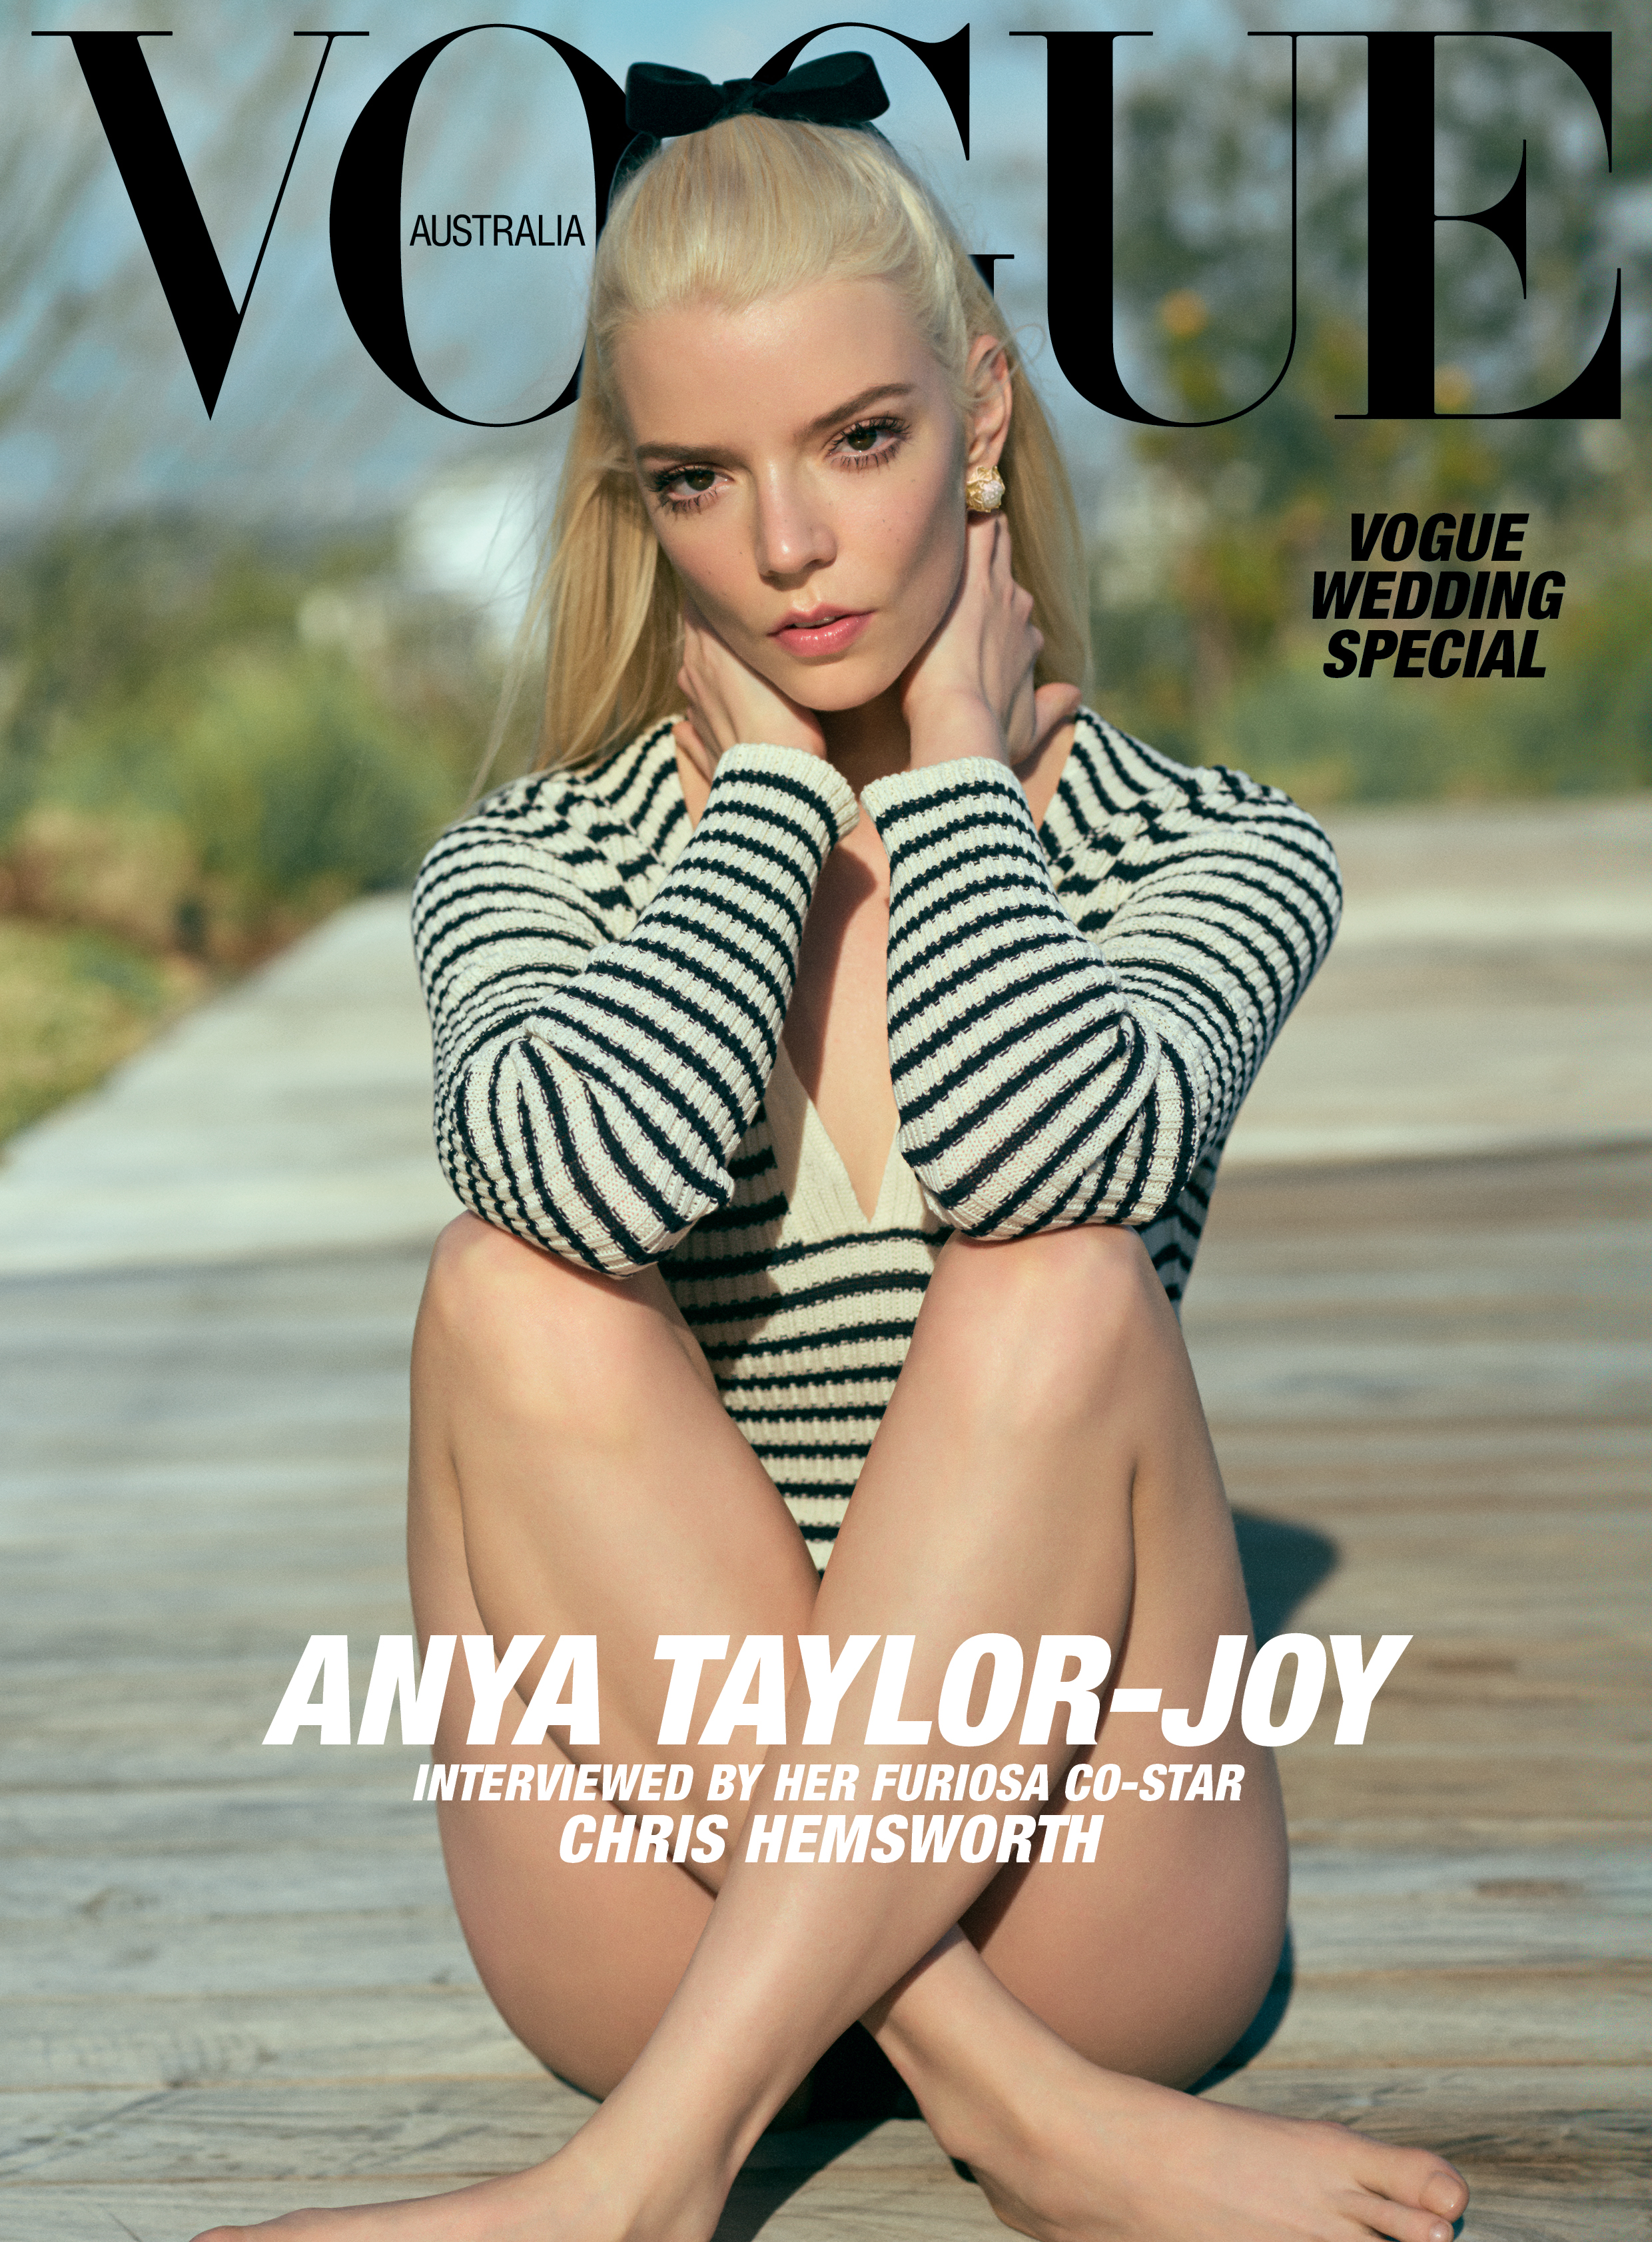 Anya showed off her long legs while posing for the cover of Vogue Australia